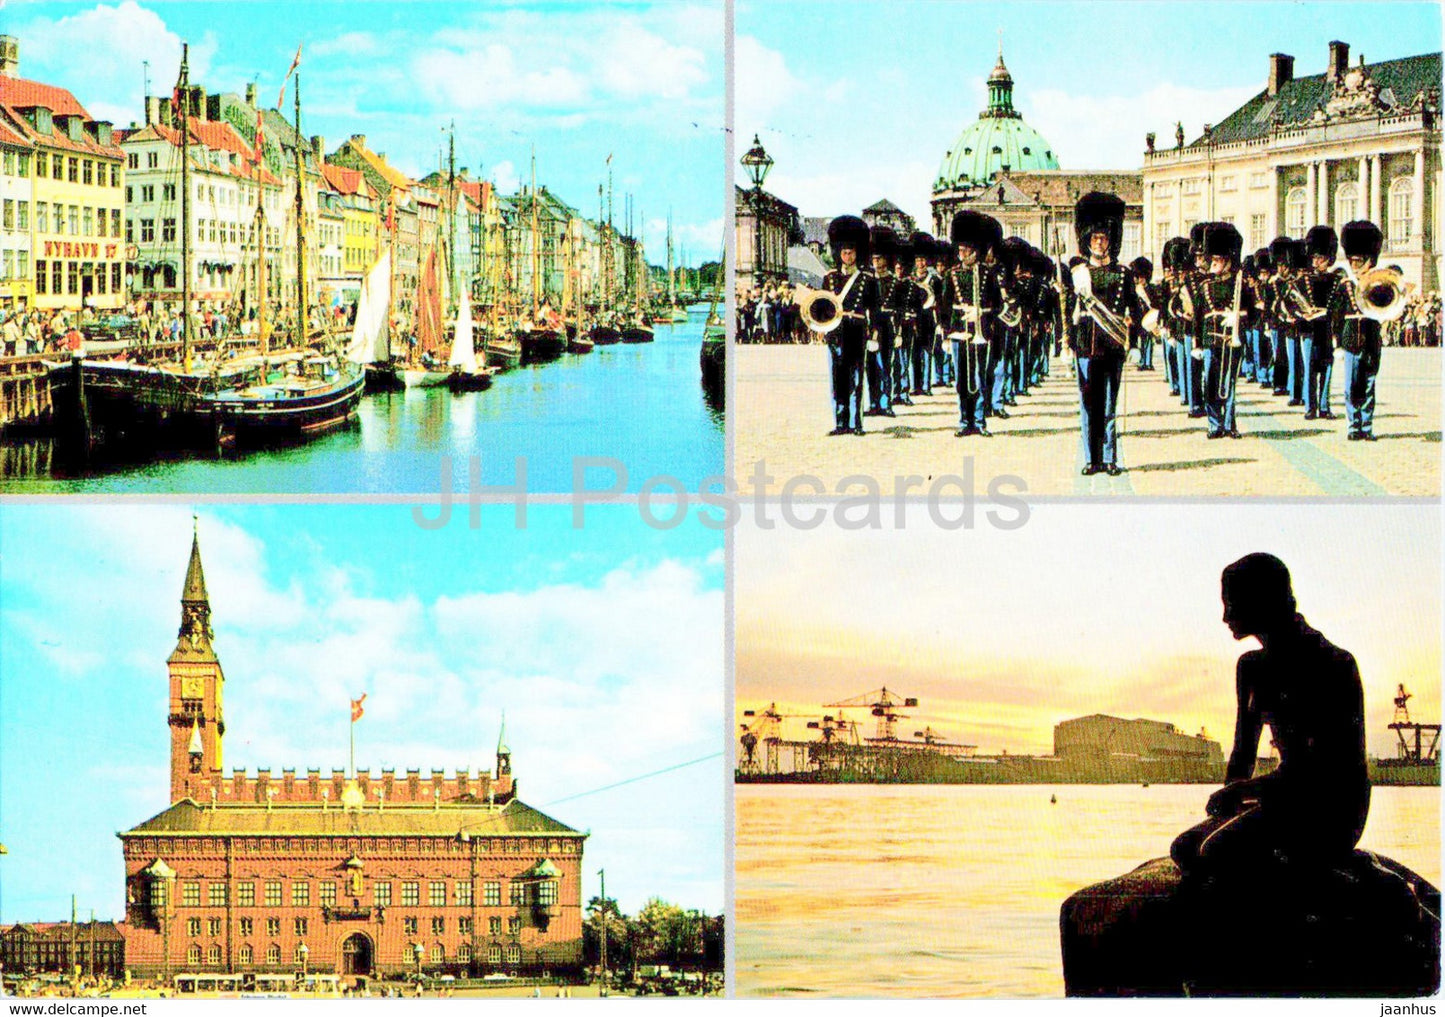 Copenhagen - Nyhavn - The Royal Guards - The Town Hall - The Little Mermaid - boat - multiview - 1998 - Denmark - used - JH Postcards